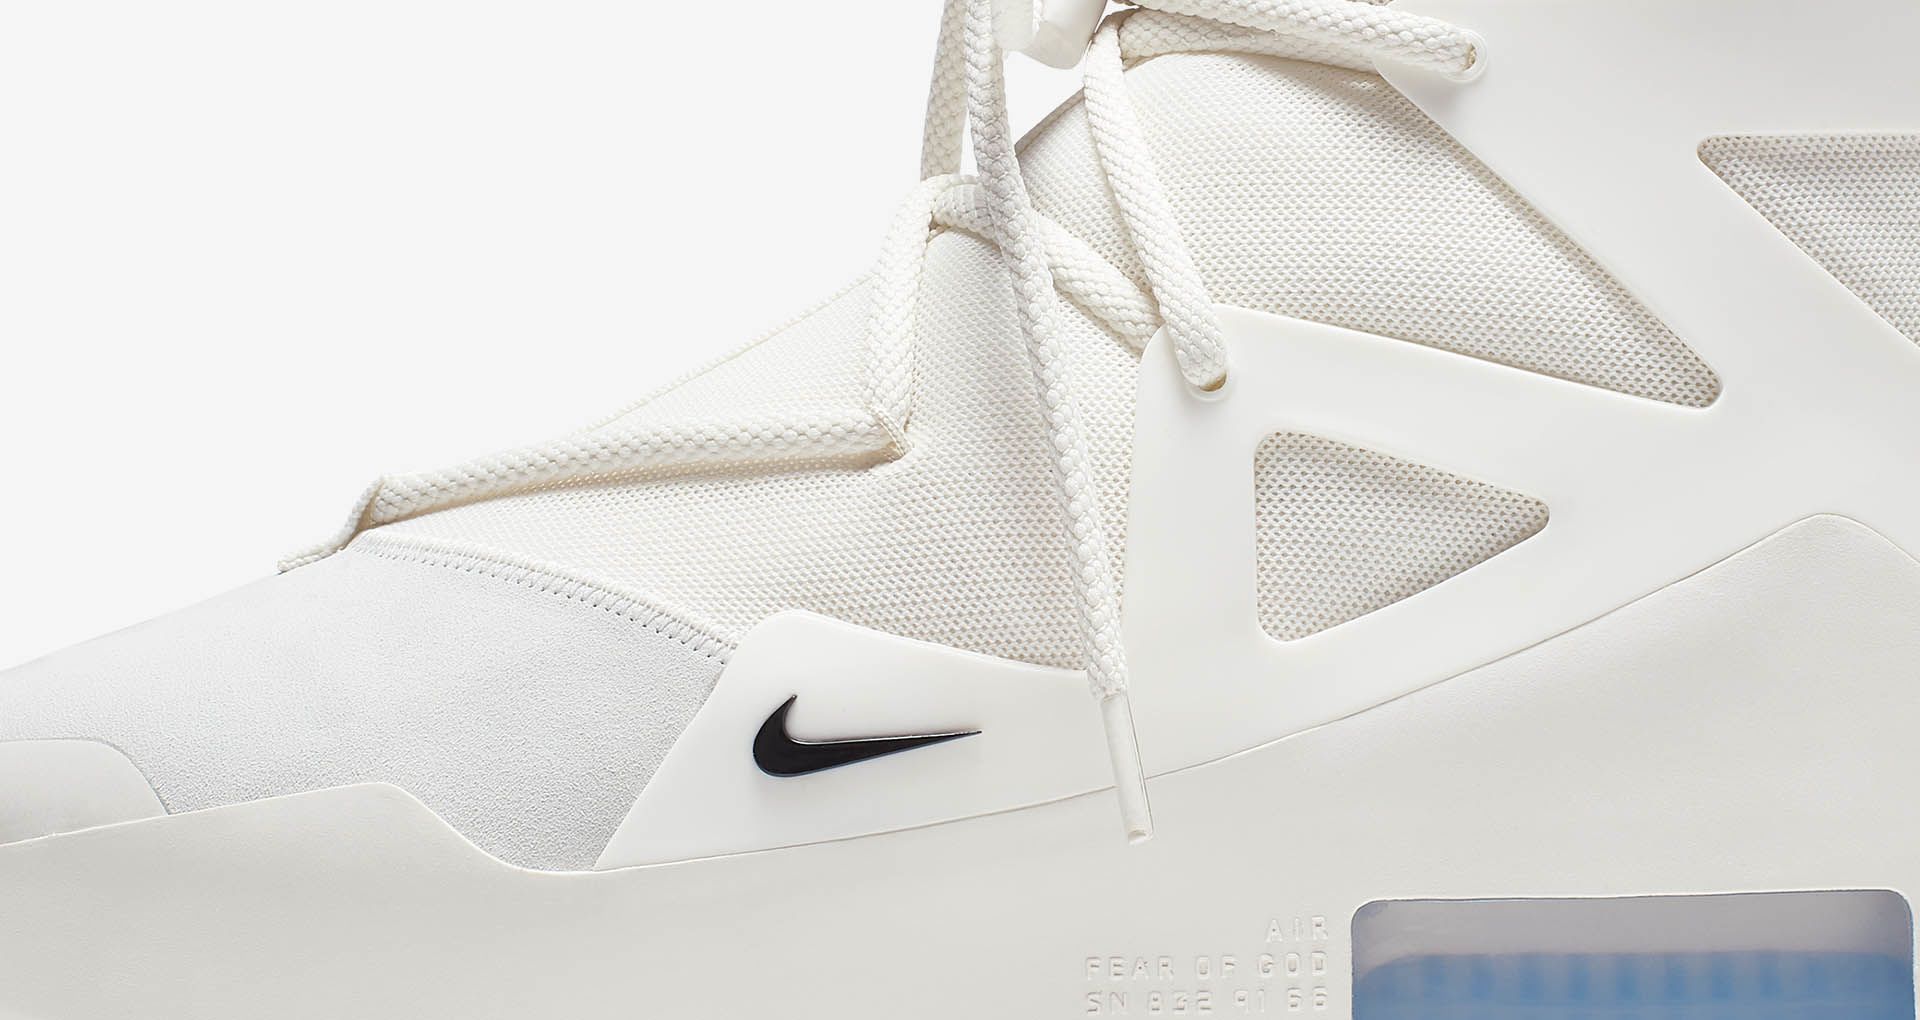 Air Fear of God 1 'Sail' Release Date. Nike SNKRS GB